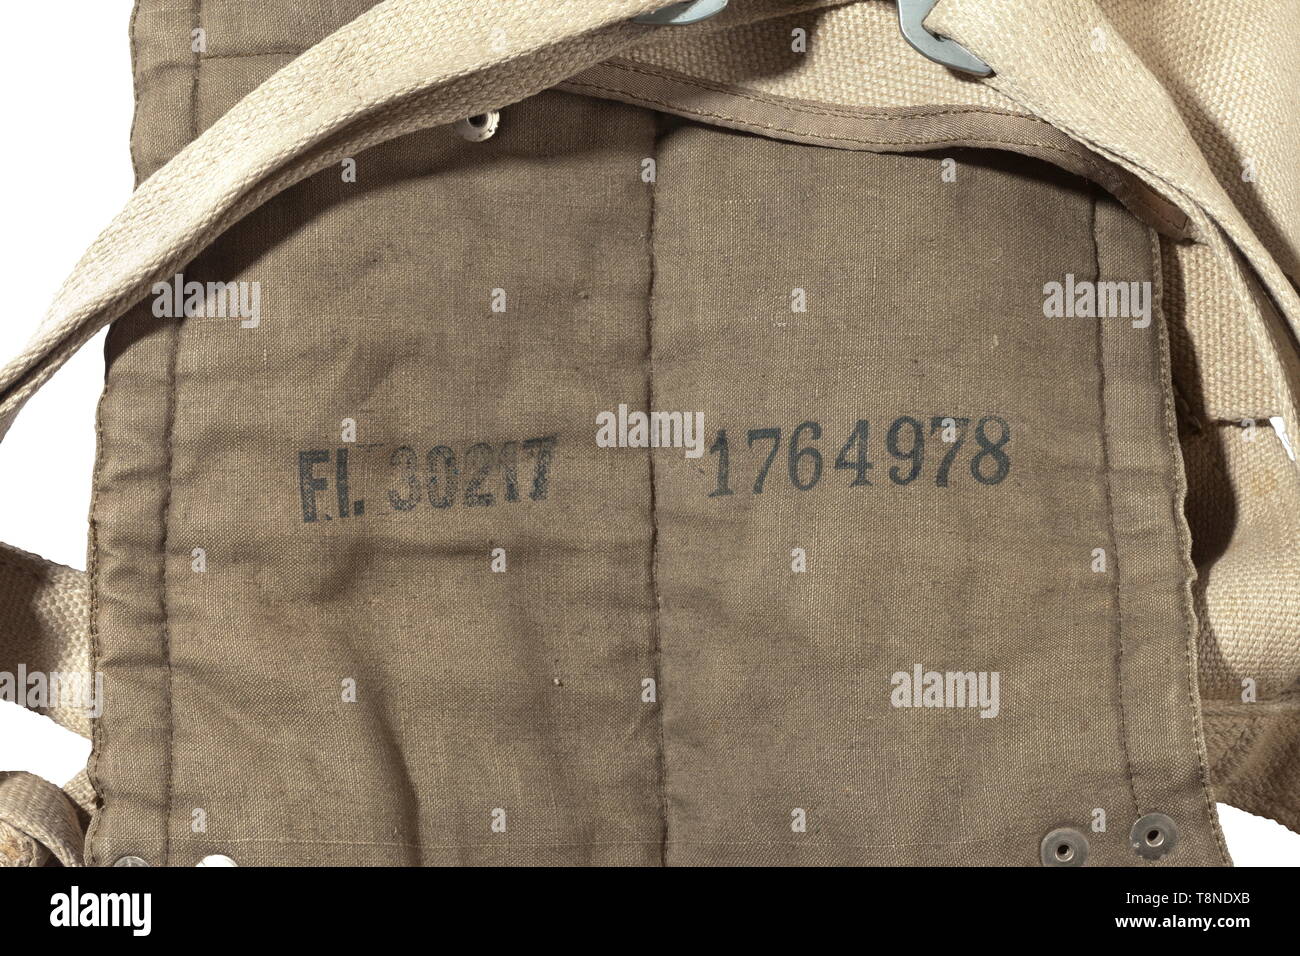 A chest-mounted parachute, type 550 Packed with many utility belts, the type label has been removed. Includes a (related?) parachute test certificate. Parachute harness with straps of robust linen, stamped with supply numbers 'Fl. 30217' and '1764978', rip cord with grip, quick-release fastener with inscription 'SA Schloss', supply number 'FL. 30232, Gerät-Nr. 10-10 C-1', factory number '4143223'. Comes with a green linen packing sack with patent push buttons 'DRP - Zieh hier', two carrying handles. Not checked for functionality or completeness, some parts with stamp or lab, Editorial-Use-Only Stock Photo